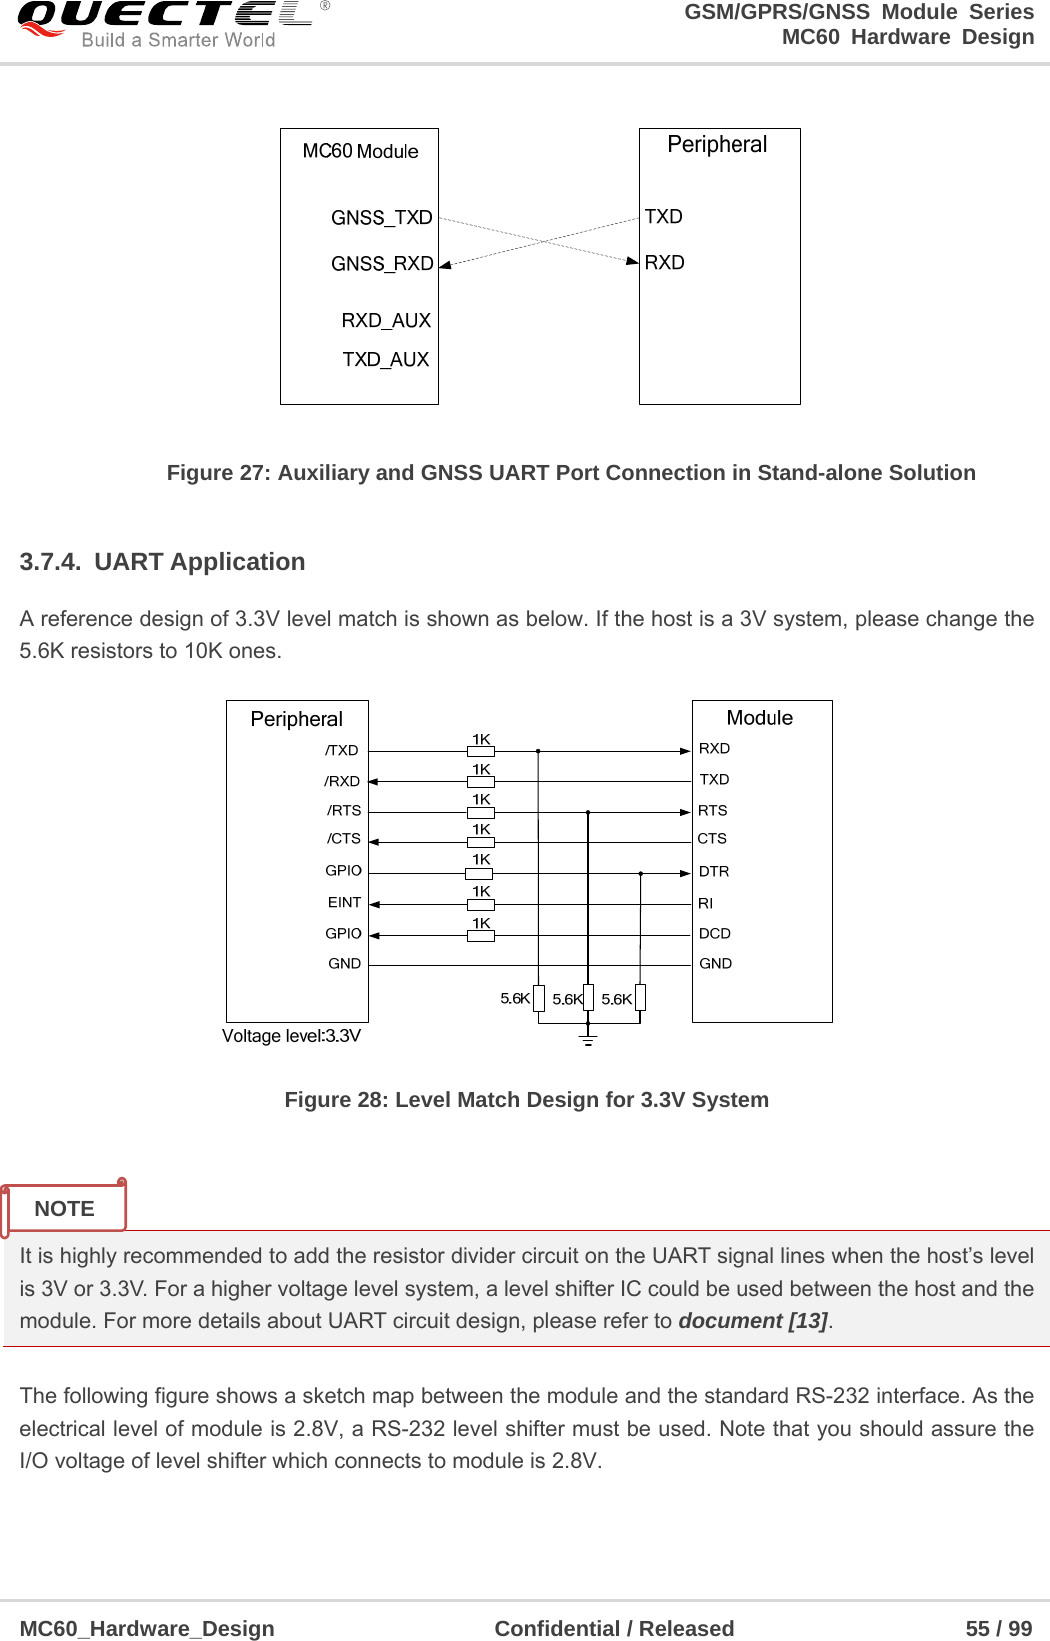                                                                     GSM/GPRS/GNSS Module Series                                                                 MC60 Hardware Design  MC60_Hardware_Design                    Confidential / Released                     55 / 99      Figure 27: Auxiliary and GNSS UART Port Connection in Stand-alone Solution  3.7.4. UART Application A reference design of 3.3V level match is shown as below. If the host is a 3V system, please change the 5.6K resistors to 10K ones.    Figure 28: Level Match Design for 3.3V System   It is highly recommended to add the resistor divider circuit on the UART signal lines when the host’s level is 3V or 3.3V. For a higher voltage level system, a level shifter IC could be used between the host and the module. For more details about UART circuit design, please refer to document [13].  The following figure shows a sketch map between the module and the standard RS-232 interface. As the electrical level of module is 2.8V, a RS-232 level shifter must be used. Note that you should assure the I/O voltage of level shifter which connects to module is 2.8V. NOTE 